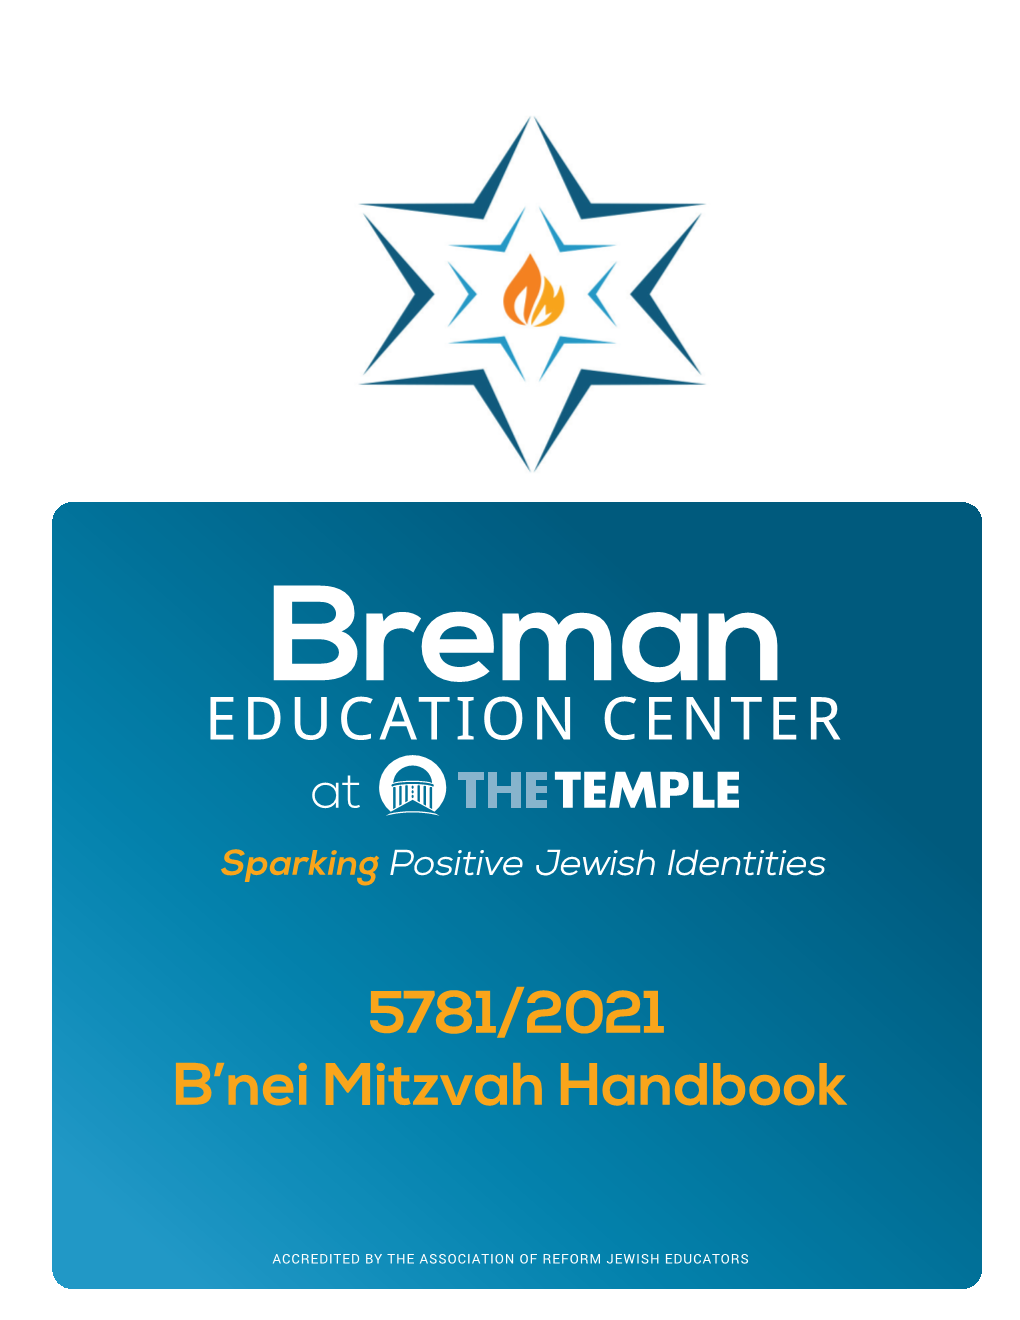 Bar/Bat Mitzvah: Our Mission 4 Let Us Welcome You to the Bar/Bat Mitzvah Process at the Temple